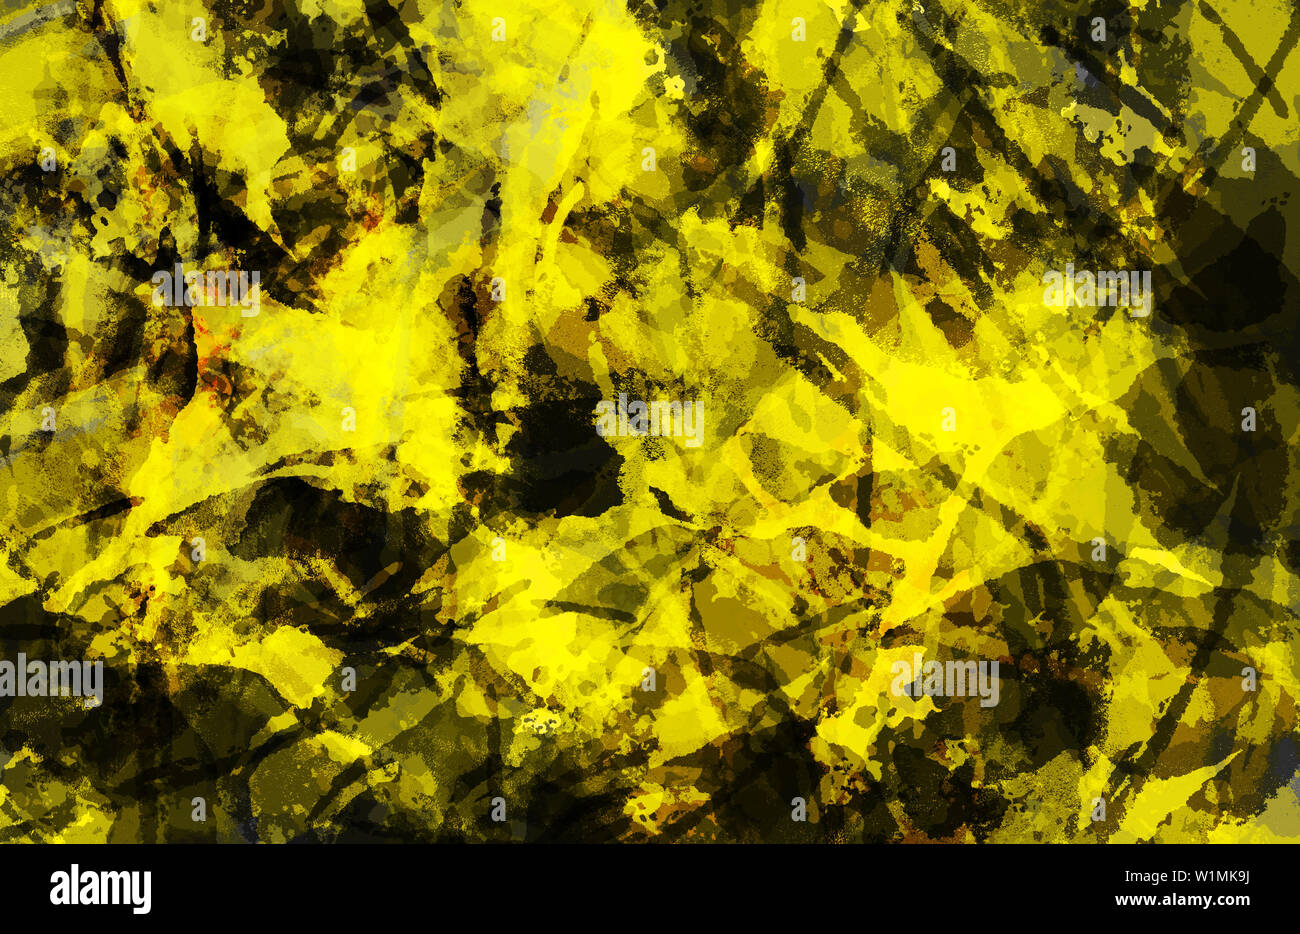 Abstract Art Background Colorful Yellow And Black Grunge Texture